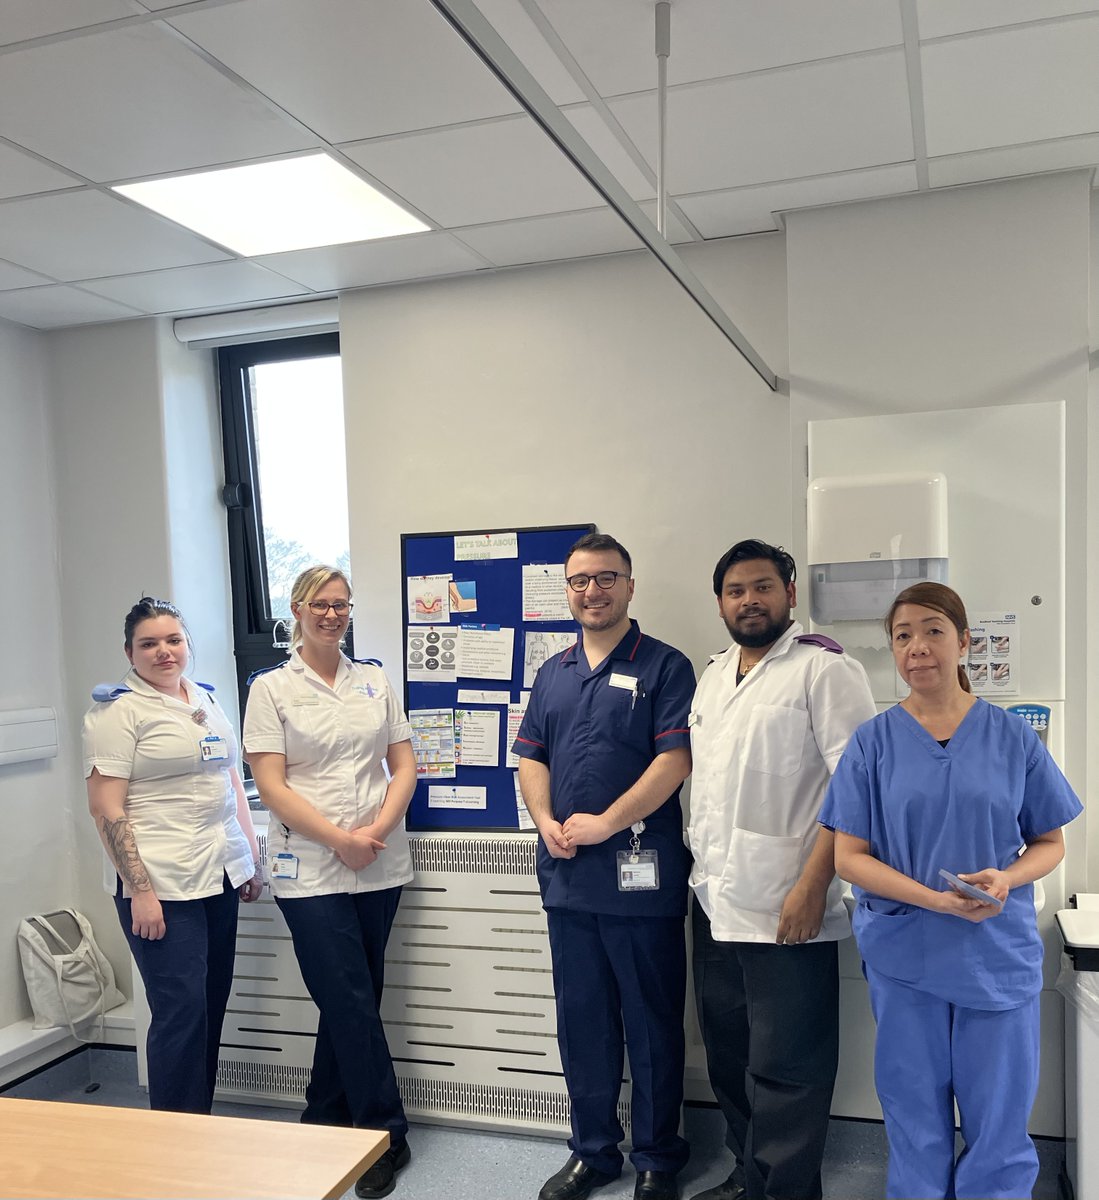 This month “Theme of the a month” is all about  Pressure Ulcer Prevention. We started with @ward6strokeunit ward 9 in our weekly educational drop in sessions. #PatientSafety #PressureUlcerPrevention